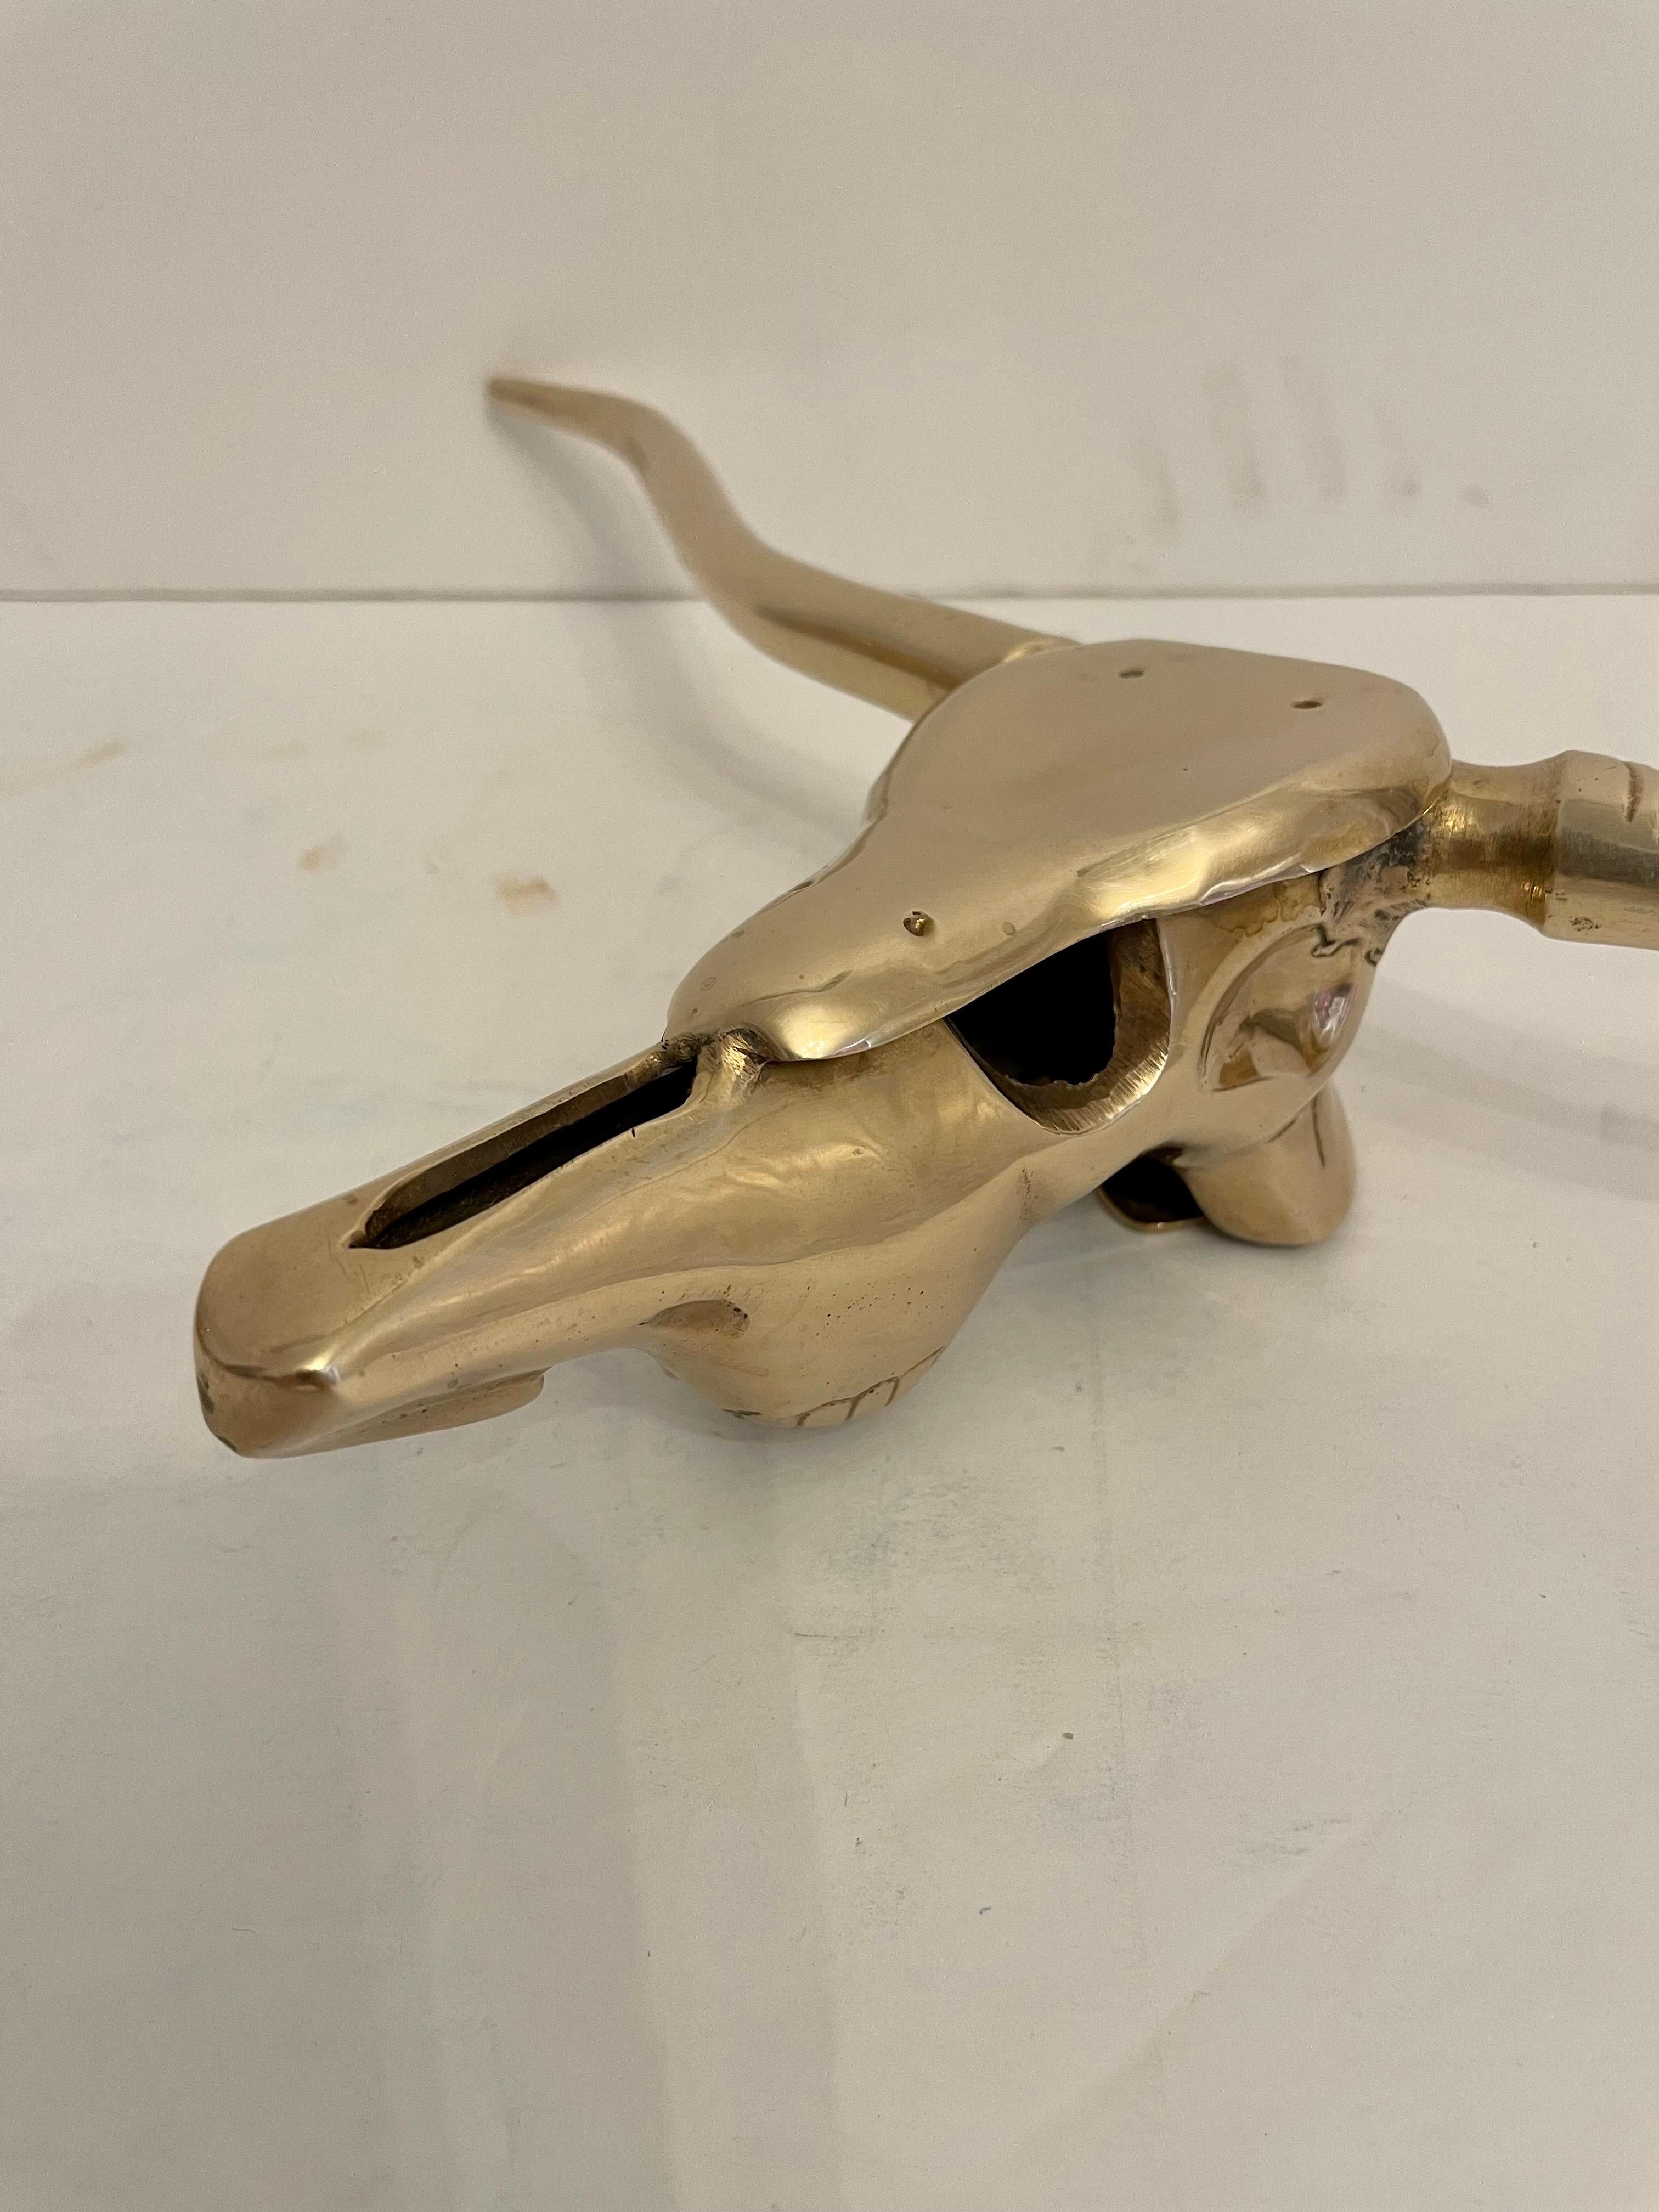 Circa late 20th century Hollywood Regency style decorative brass longhorn skull wall sculpture in a hand polished finish. Please note of wear consistent with age. Good overall condition.